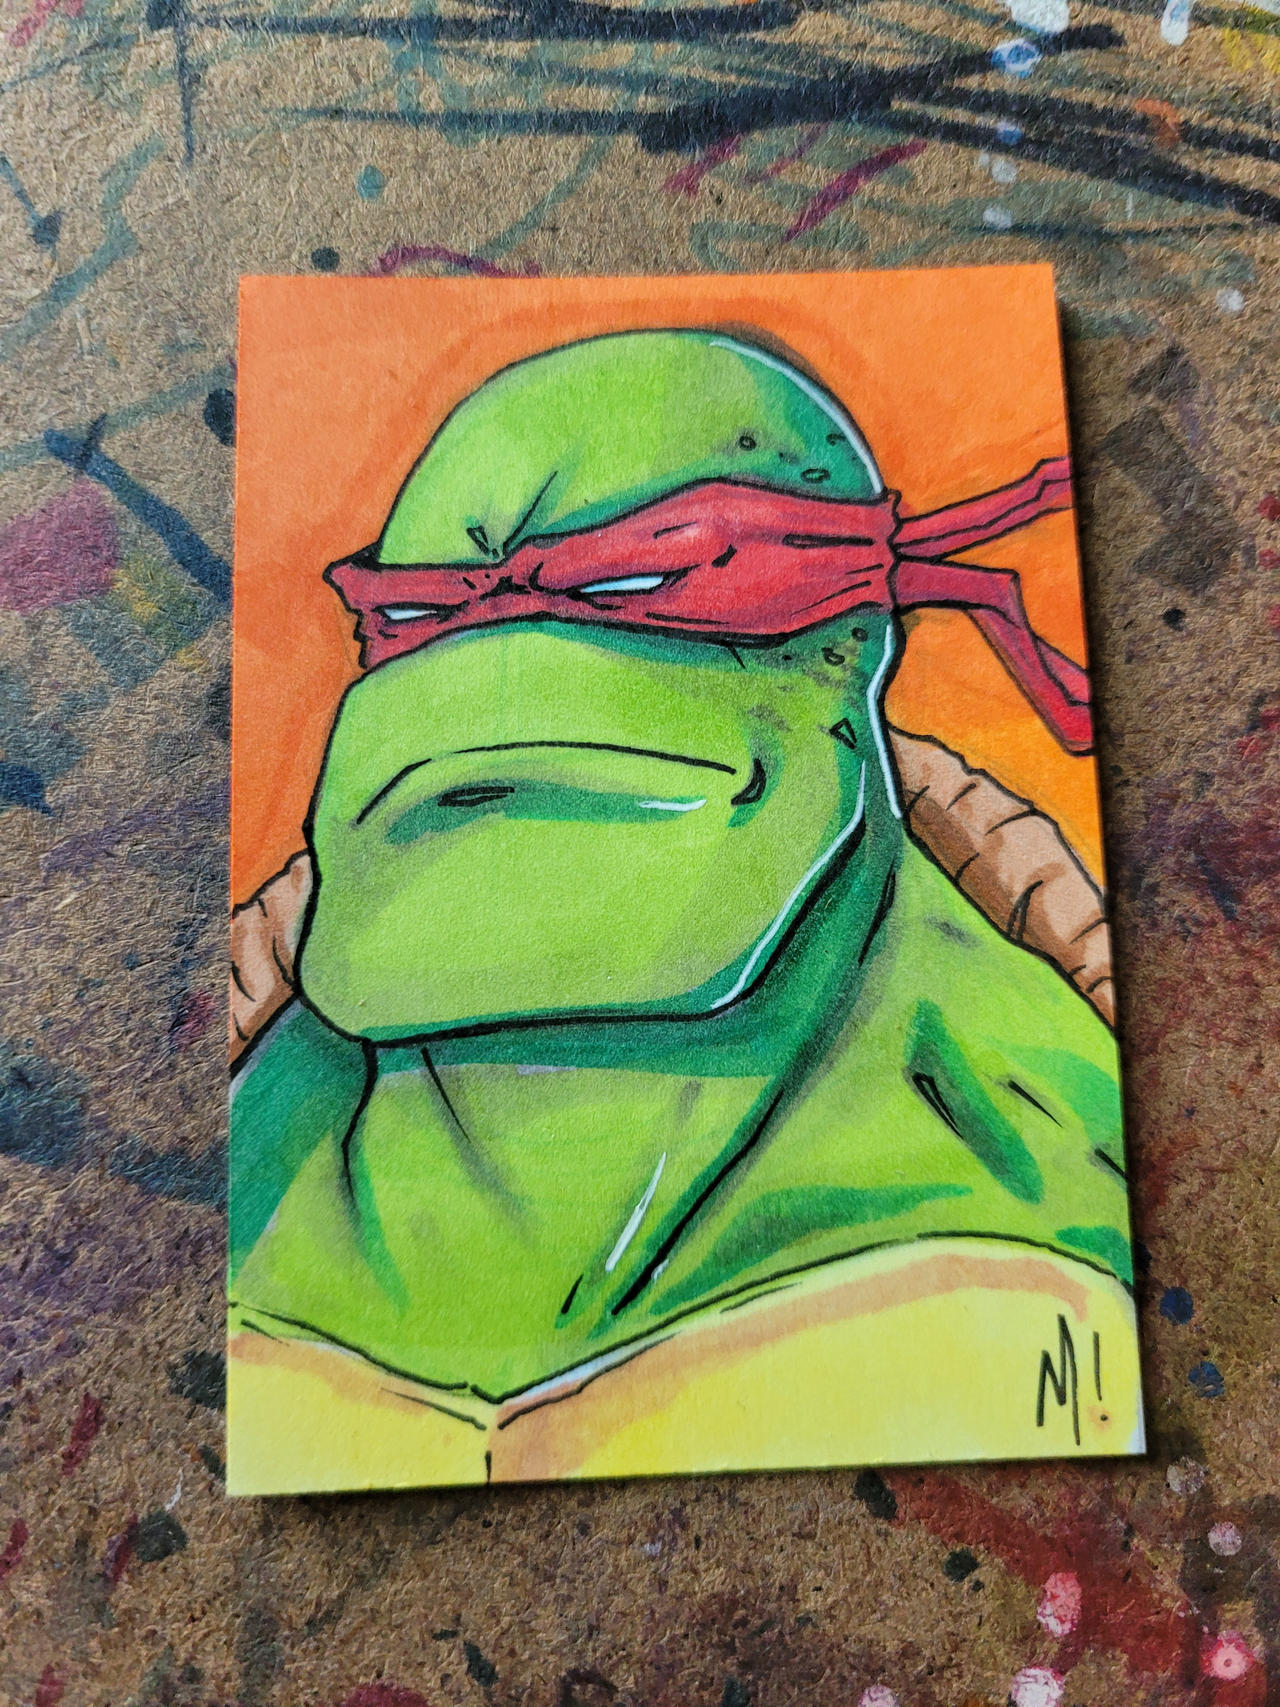 Raphael - Acrylic on Canvas by awilliamswriter on DeviantArt